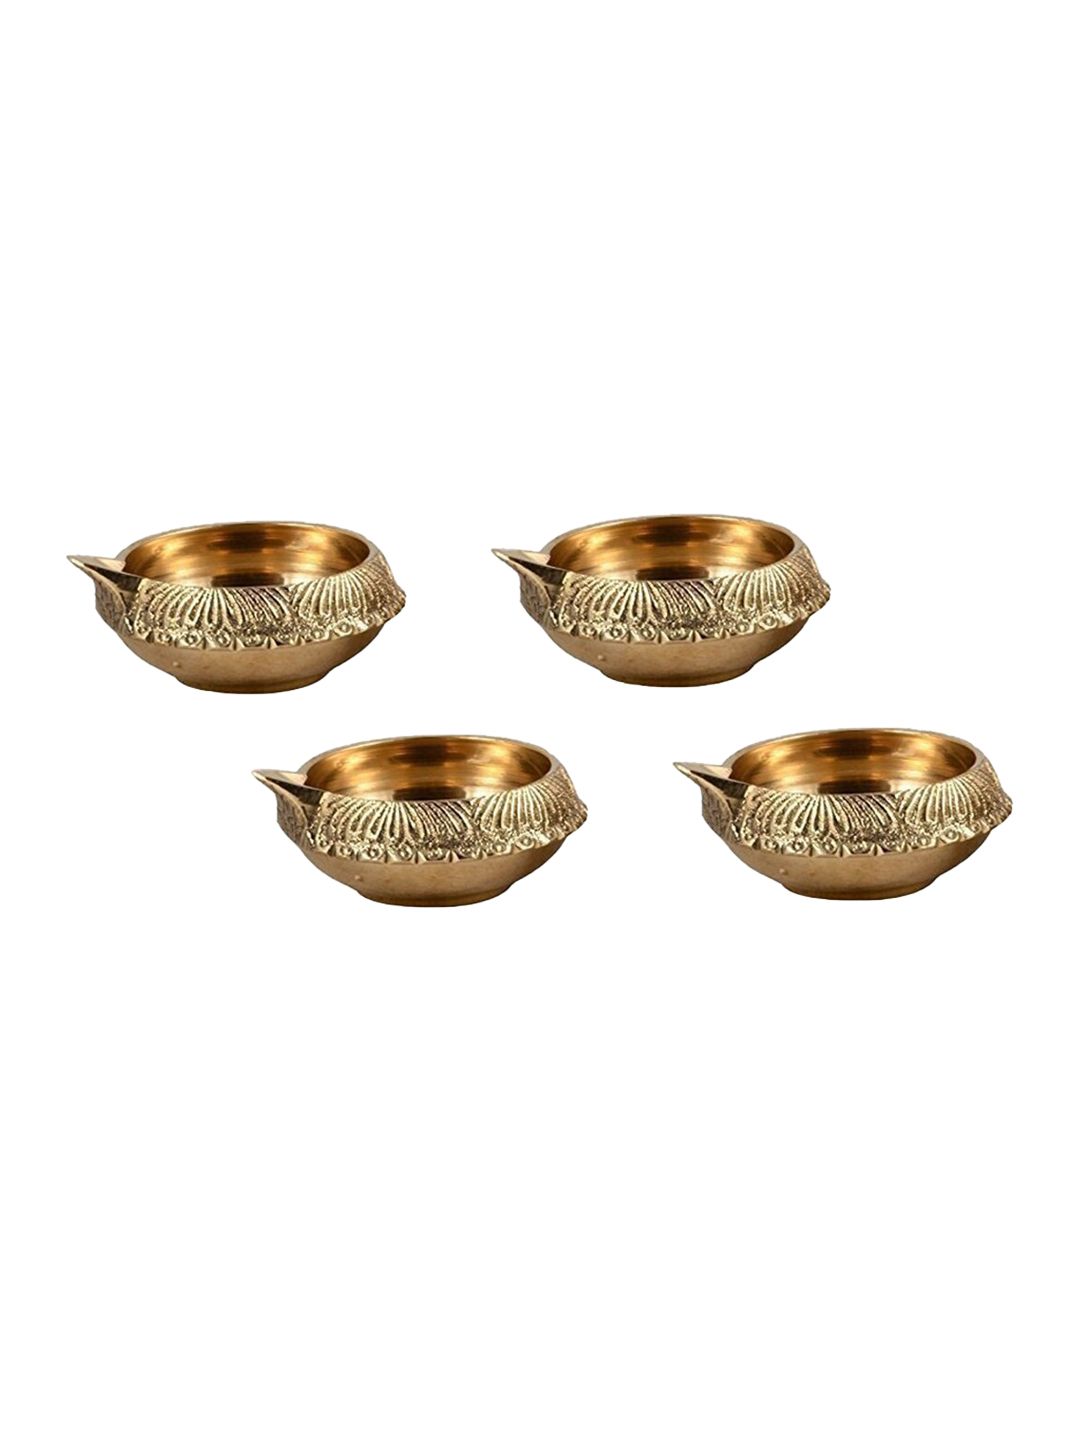 WENS Set Of 4 Gold-Toned Puja Brass Diya Lamps Price in India